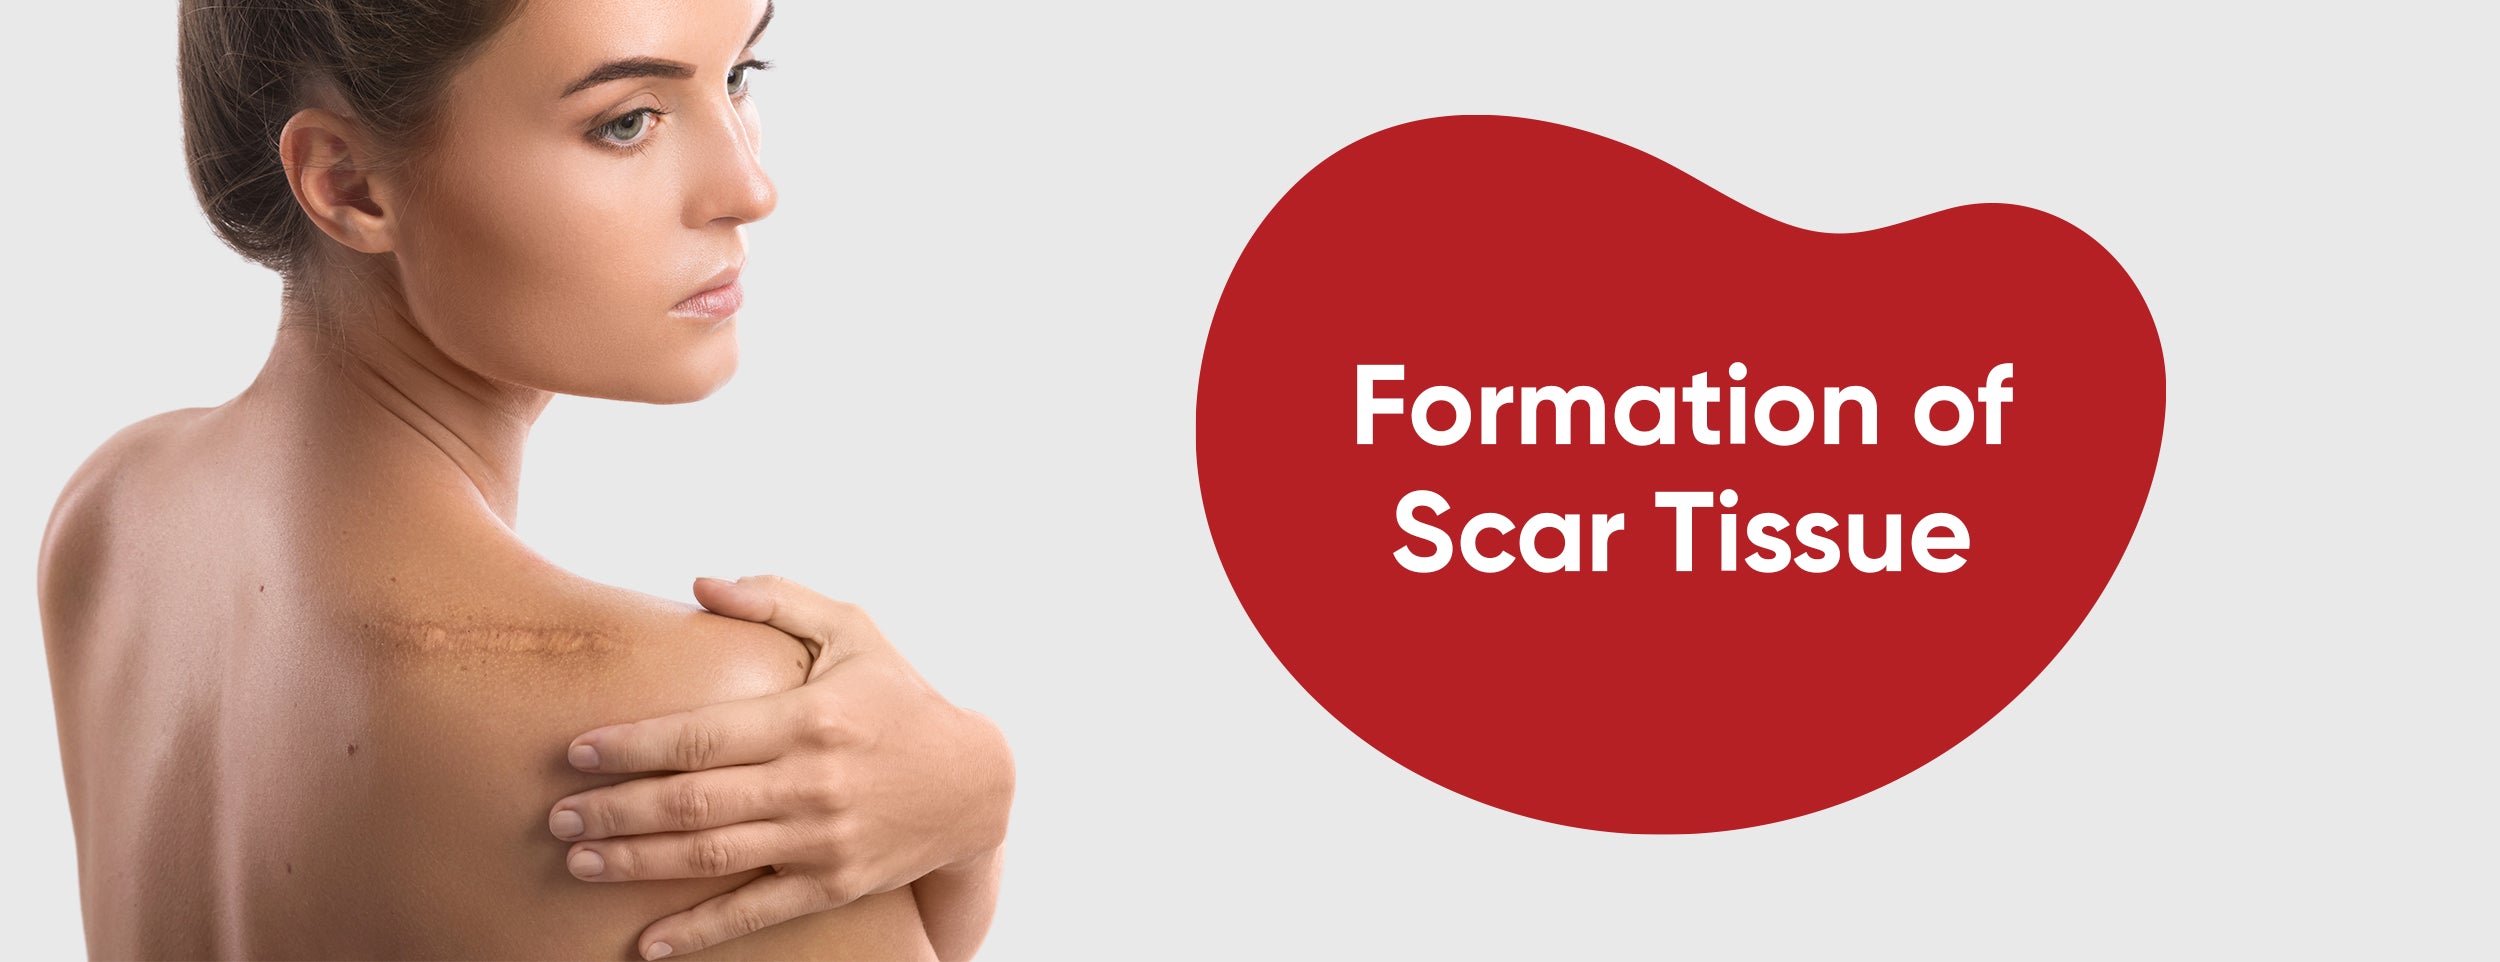 The formation of scar tissue